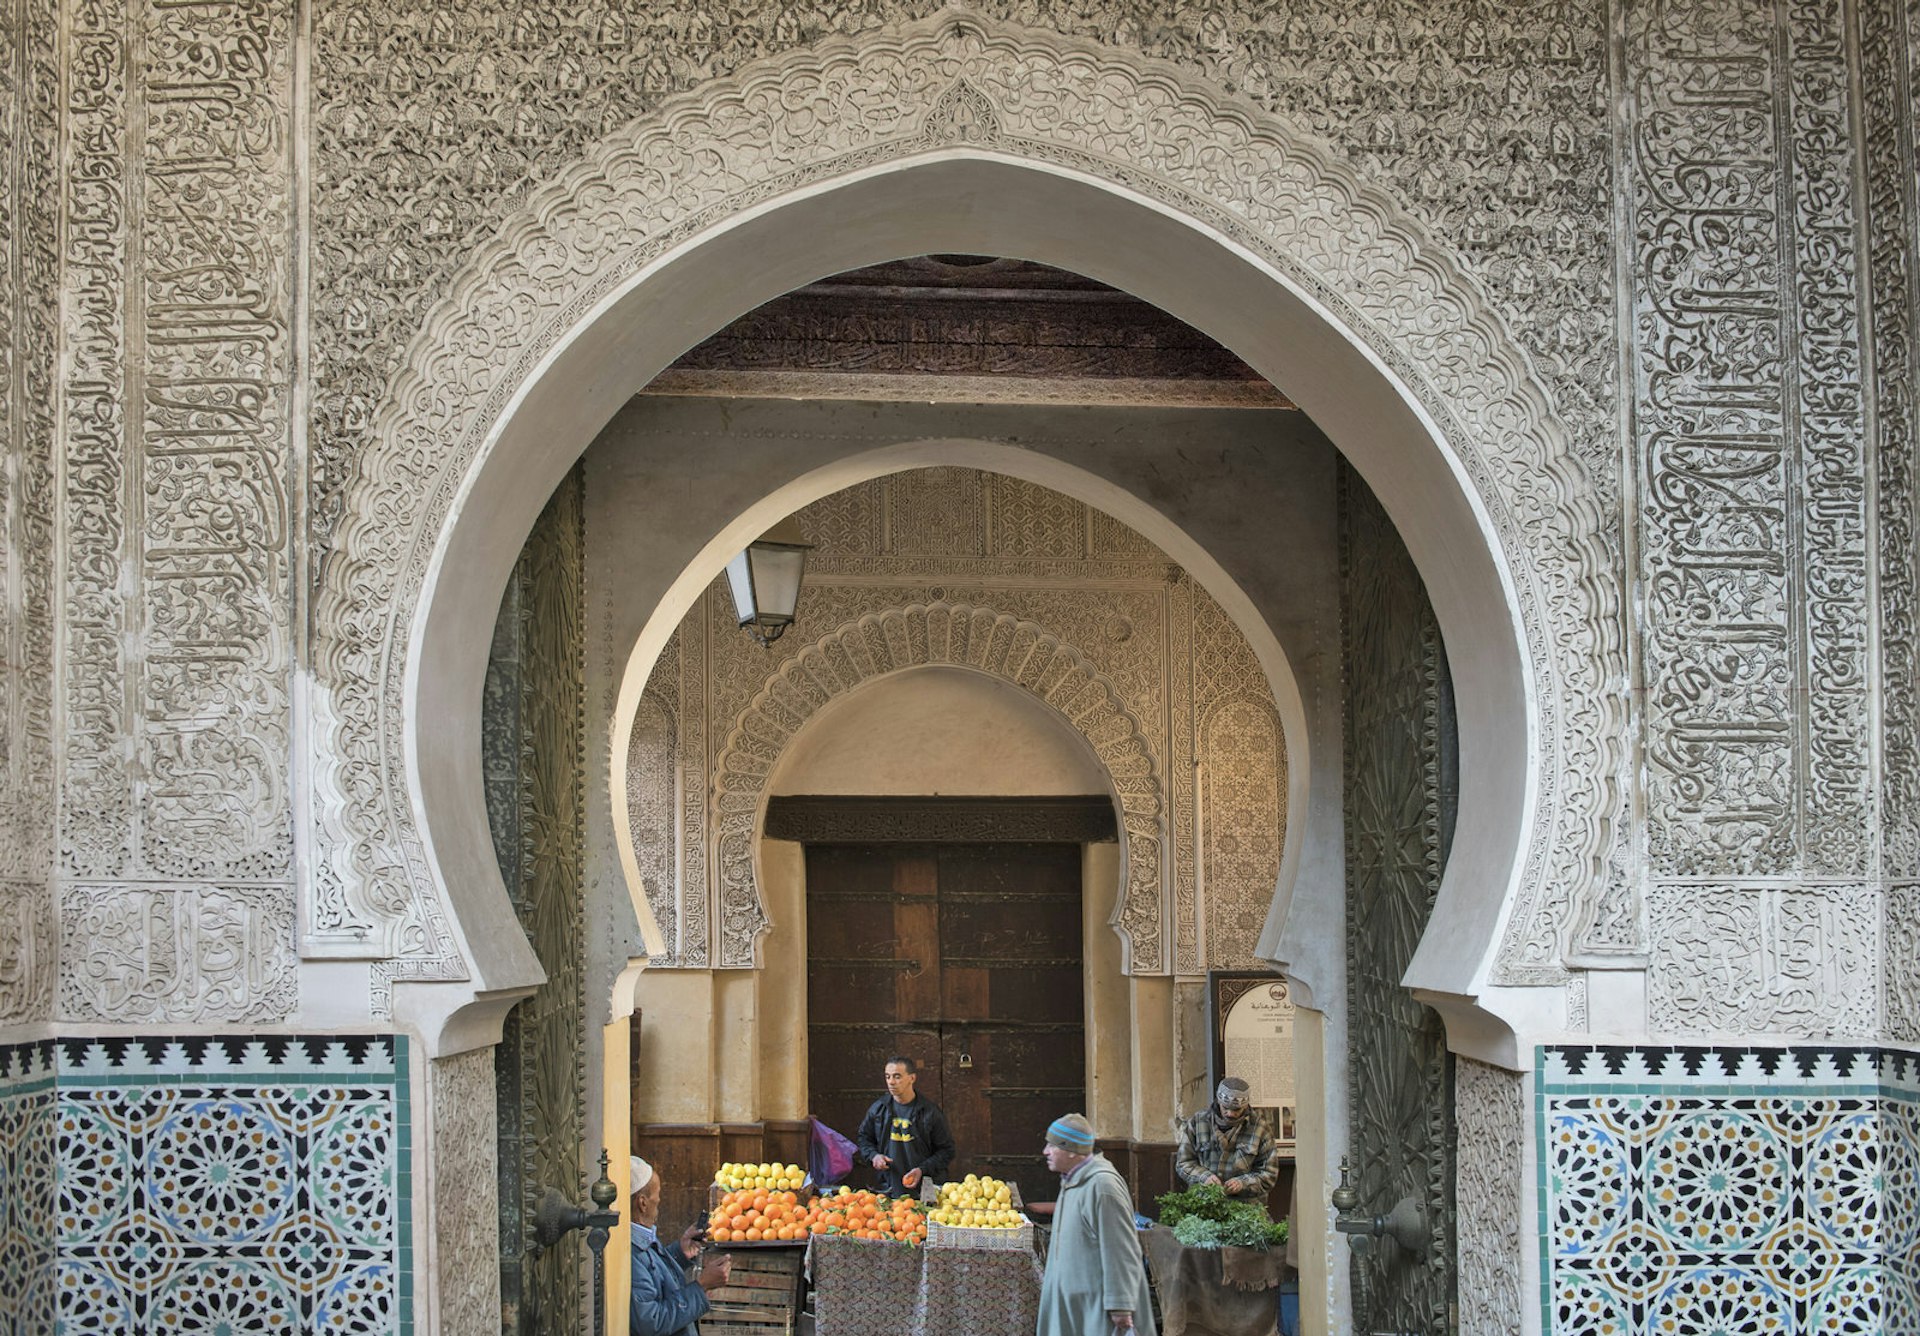 The Medersa Bou Inania is the finest of the city's theological colleges. It was built by the Merenid sultan Bou Inan between 1350 and 1357 in Fez, Morocco.